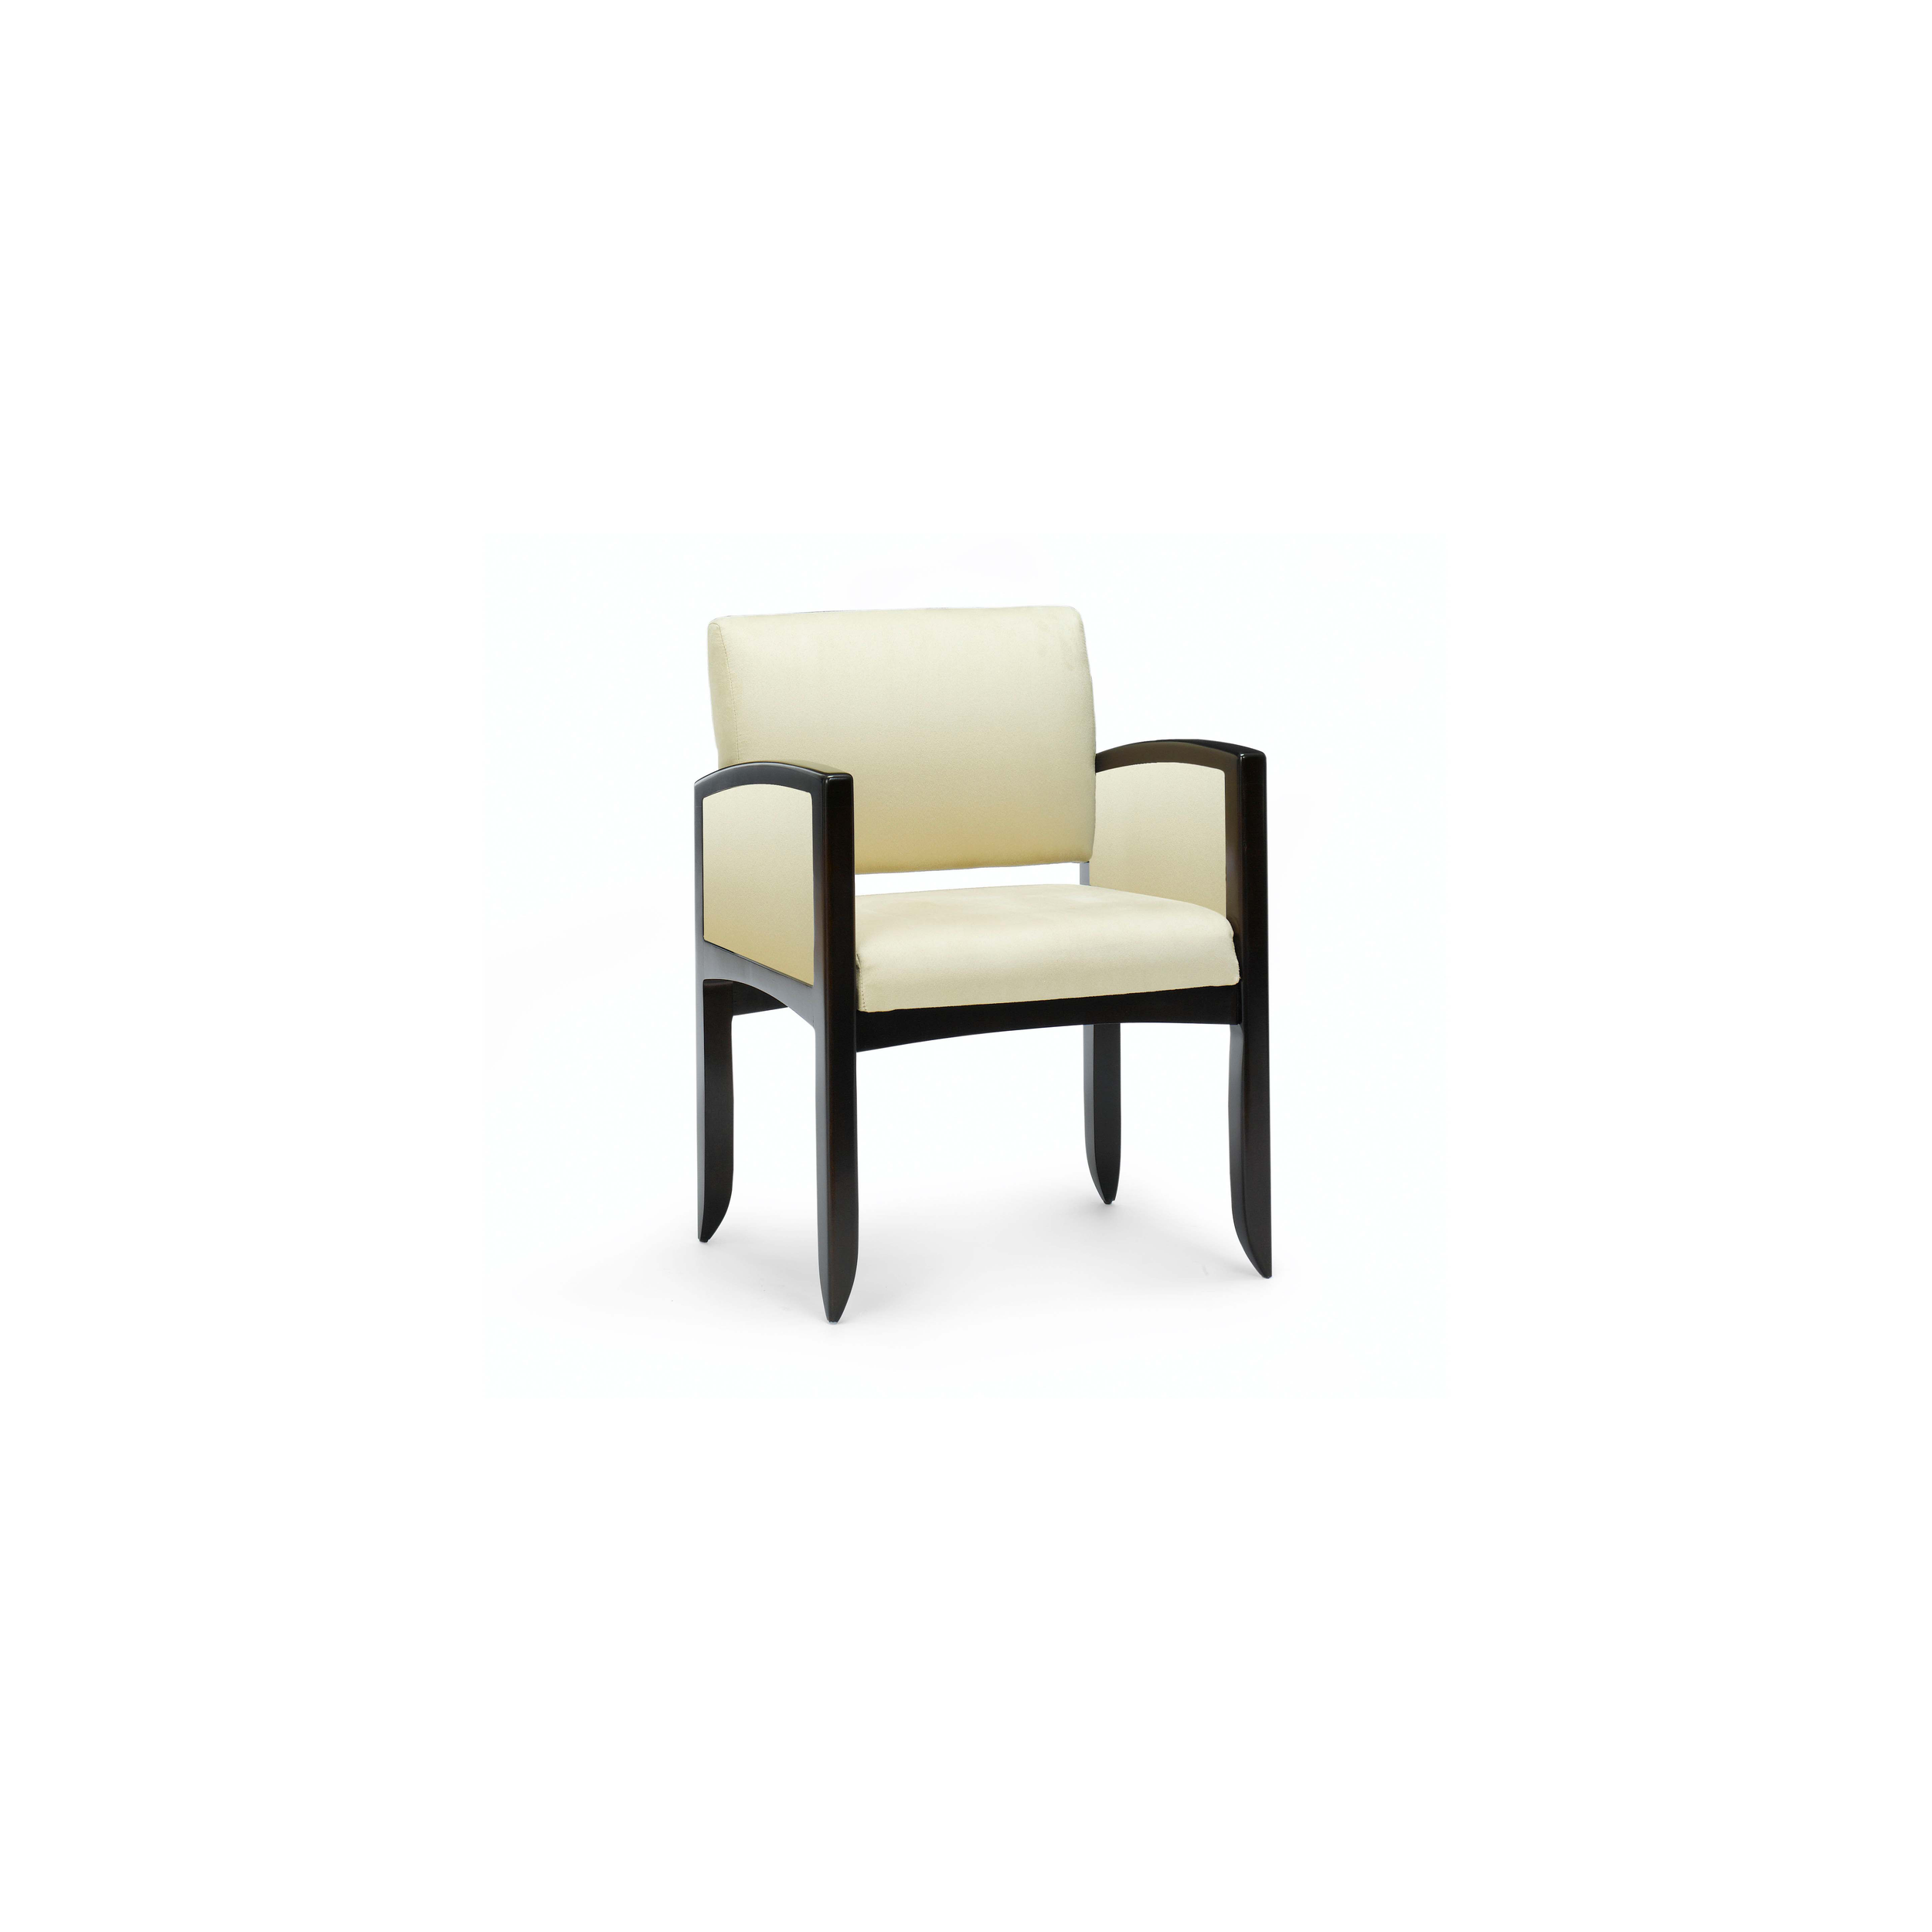 2022 SODO SINGLE WITH UPHOLSTERED ARM PANEL IN COM AND BLACK OAK FINISH